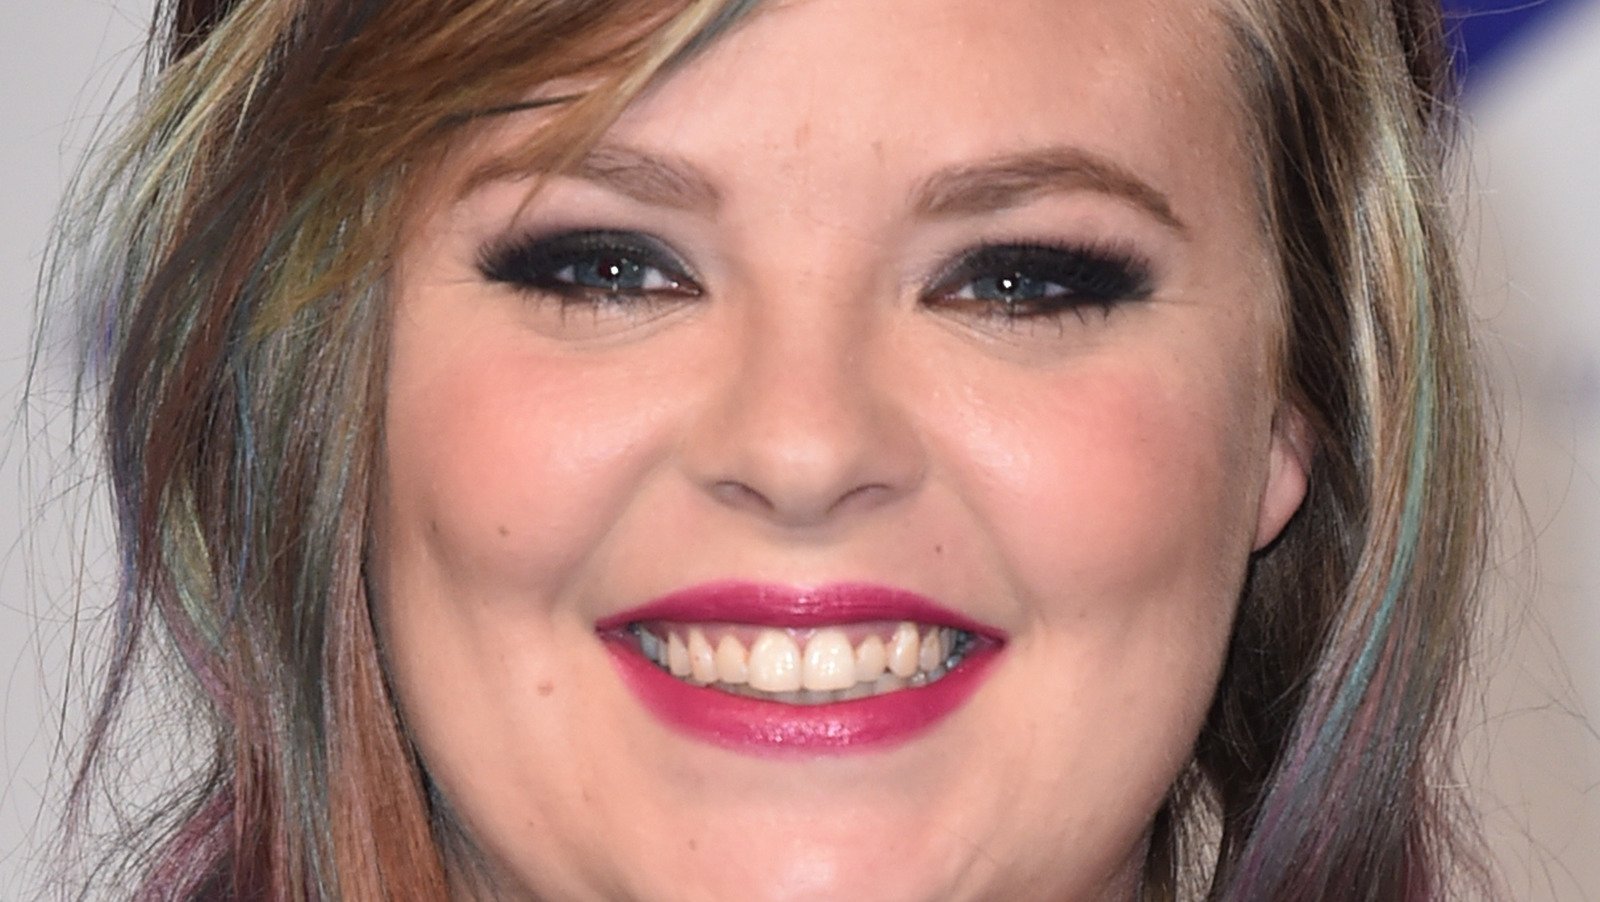 Here's What Catelynn Lowell From Teen Mom OG Really Does For A Living